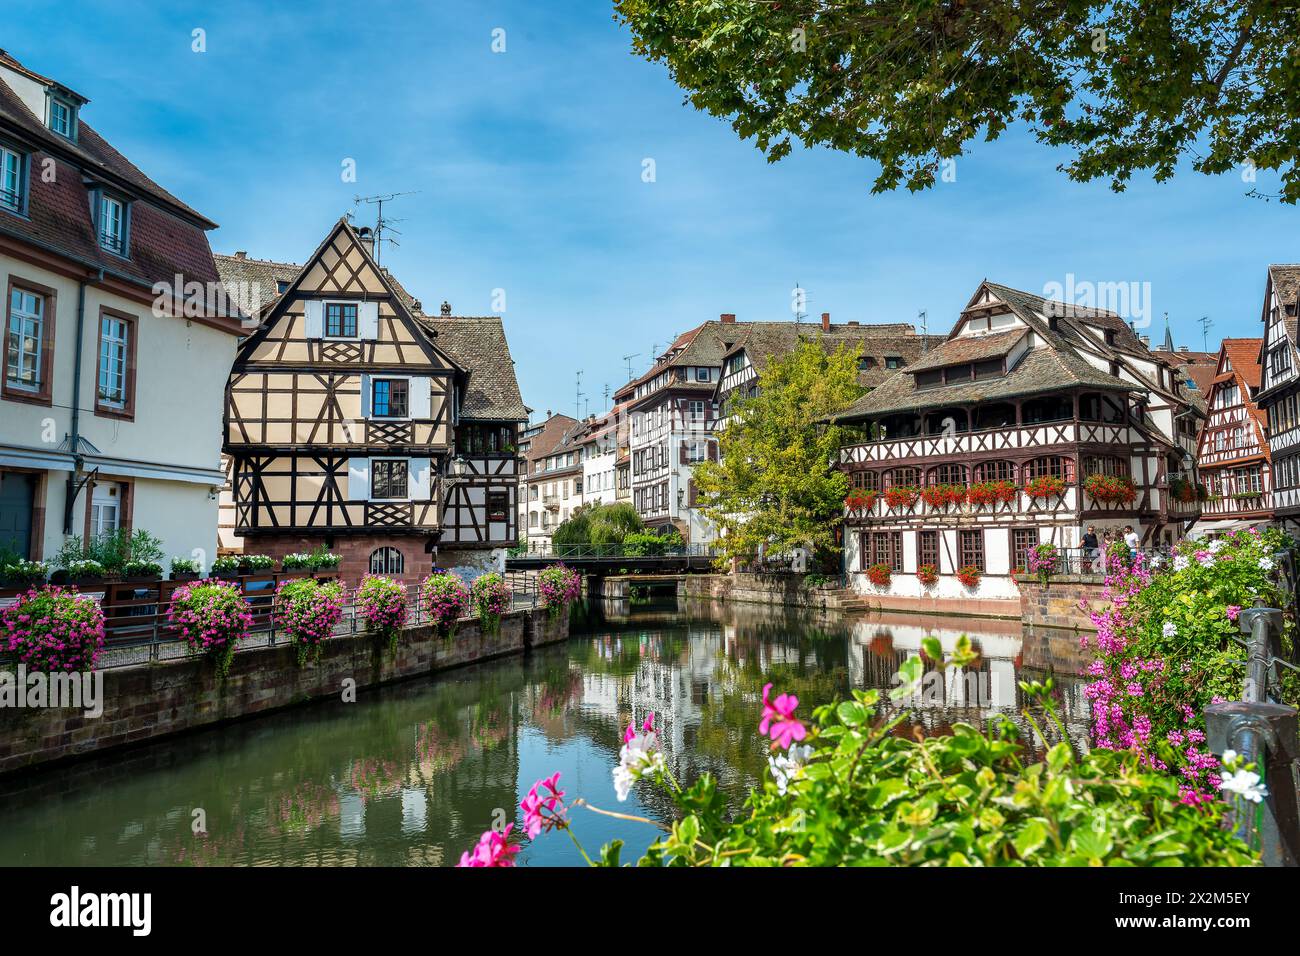 The river Ill in the Petite France, a Little Venice district in Strasbourg, France Stock Photo